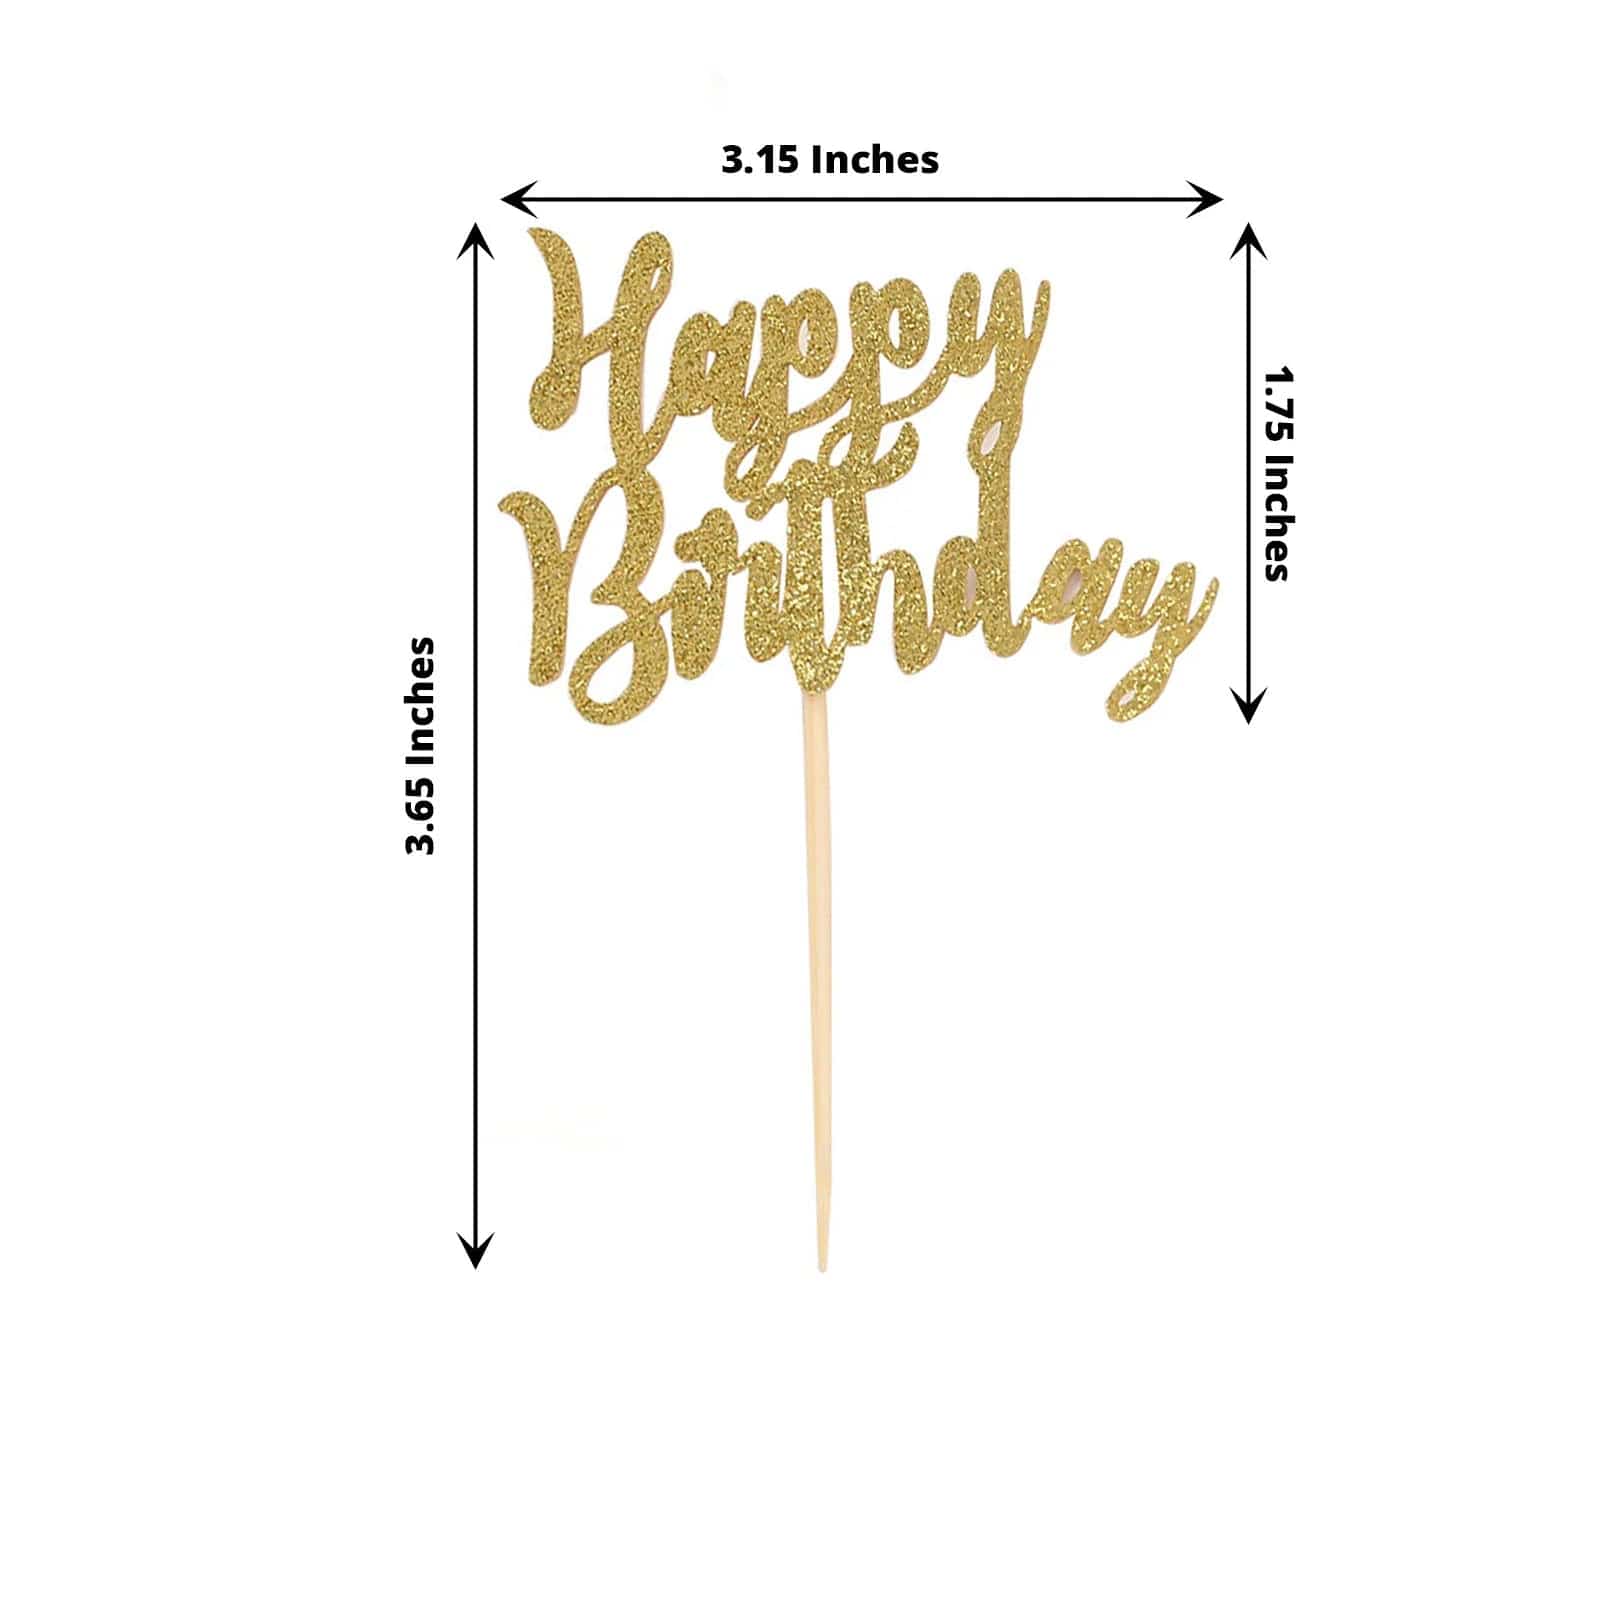 24 Gold Glittered Happy Birthday Cake and Cupcake Toppers